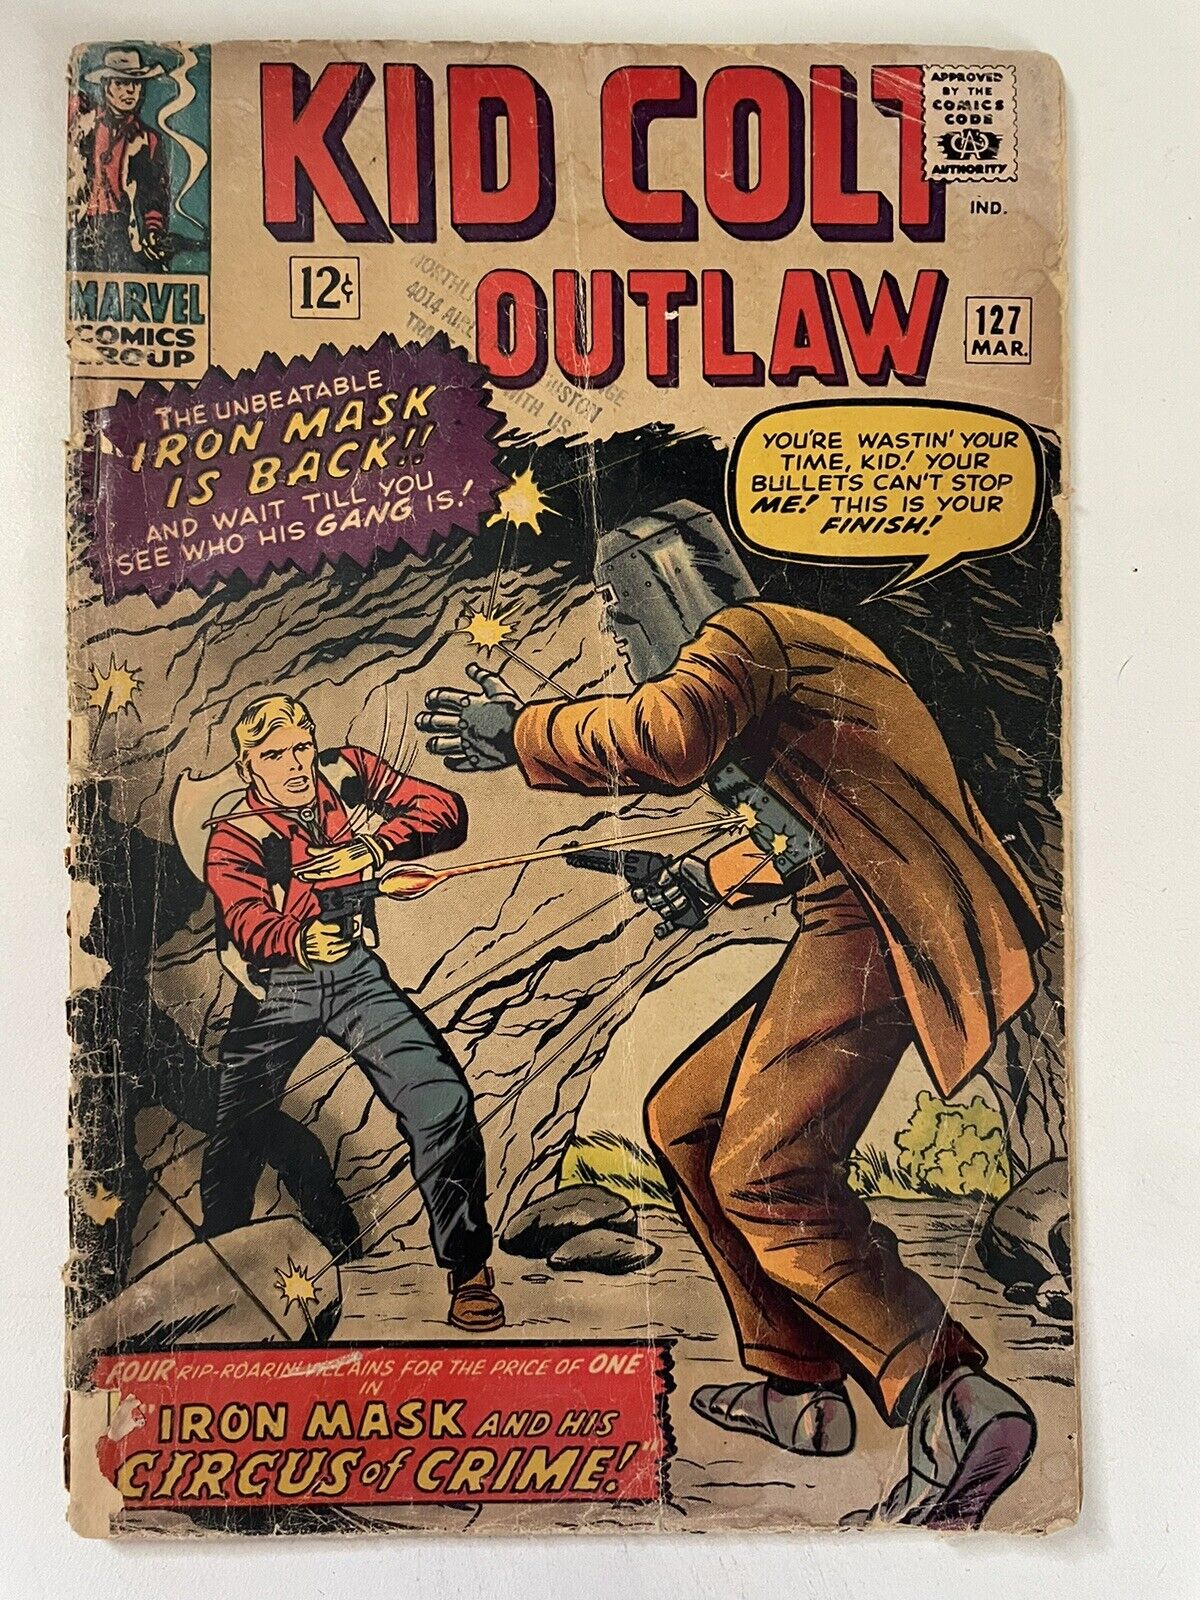 Kid Colt, Outlaw #127  Marvel Comics (1966) IRON MASK Silver Age Western